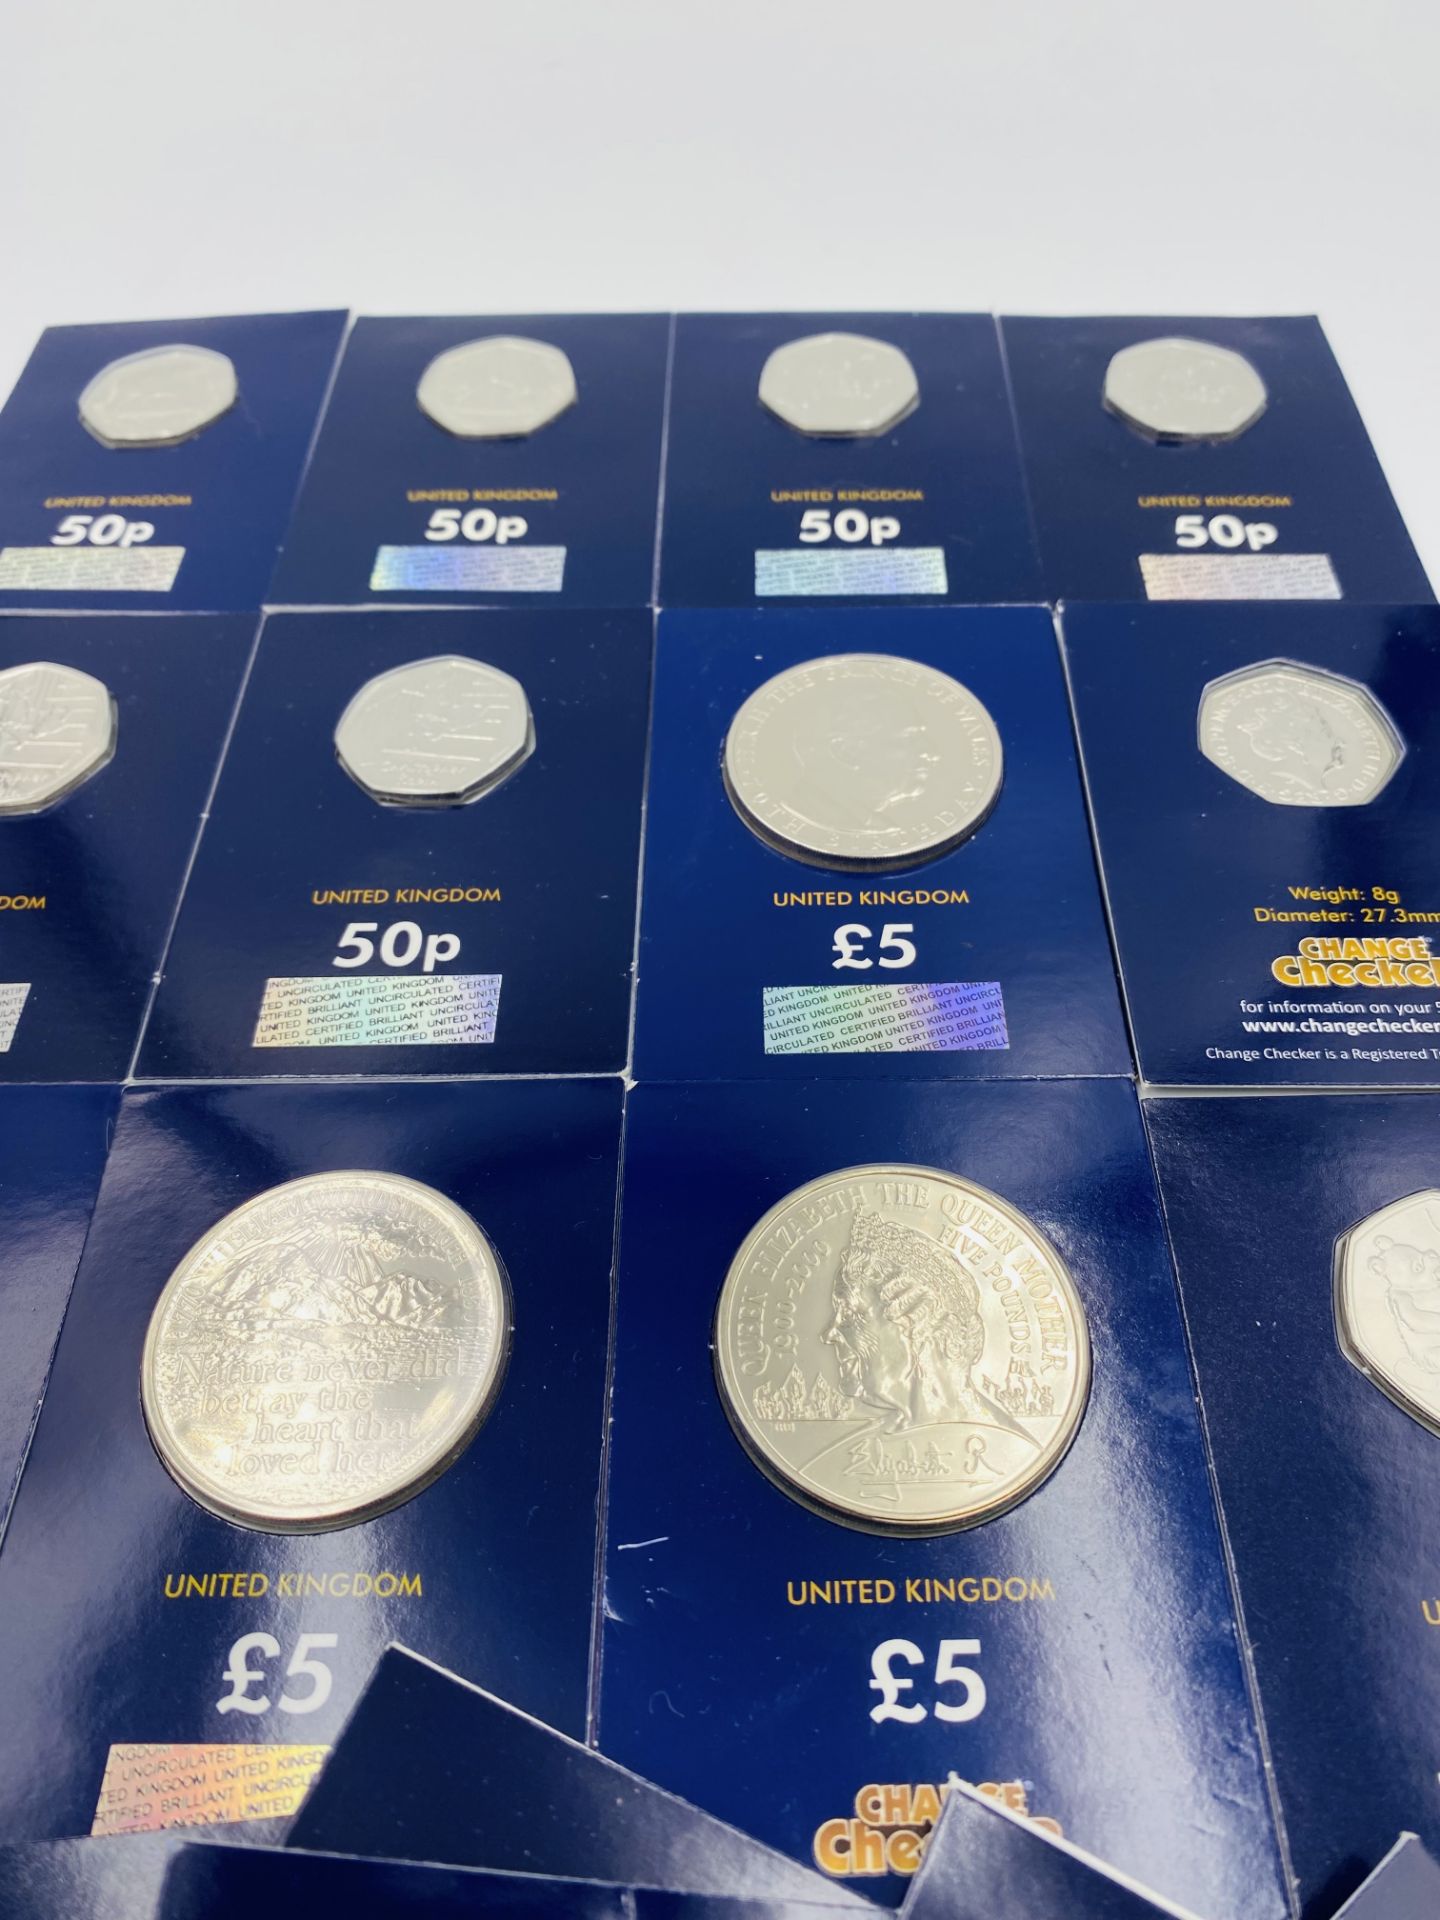 Album of 27 uncirculated Change Checker £5 coins; a quantity of sealed Change Checker coins - Image 2 of 8